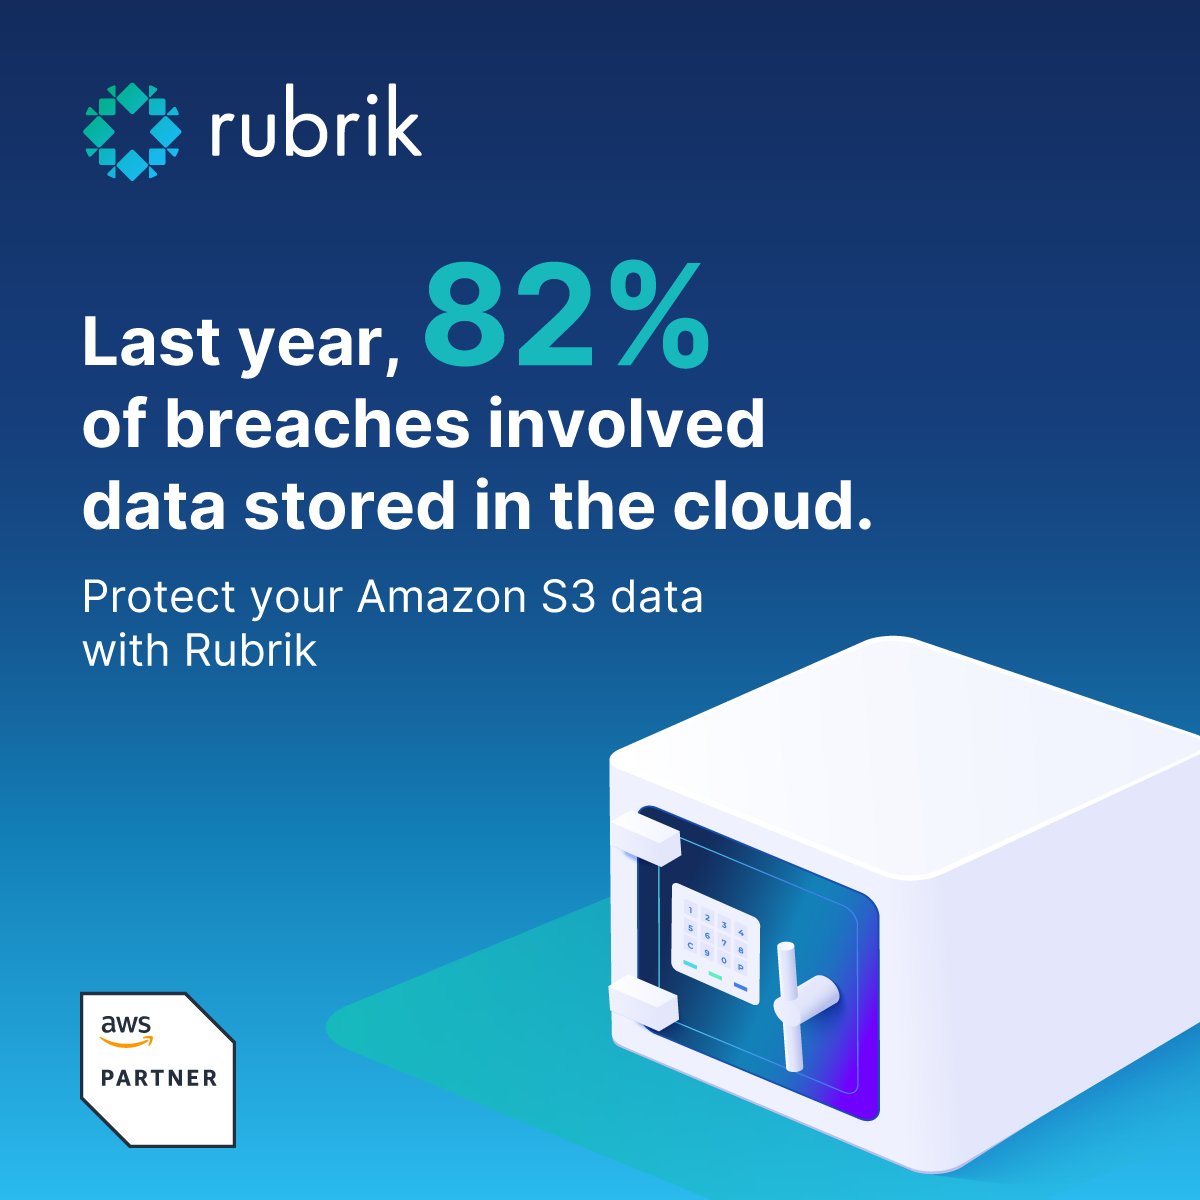 Whether you’re a large enterprise with thousands of Amazon Simple Storage Service (Amazon S3) buckets across hundreds of @AWSCloud accounts, or a small business just getting started with Amazon S3, Rubrik has you covered. Learn more 👉 rbrk.co/3V66aC0